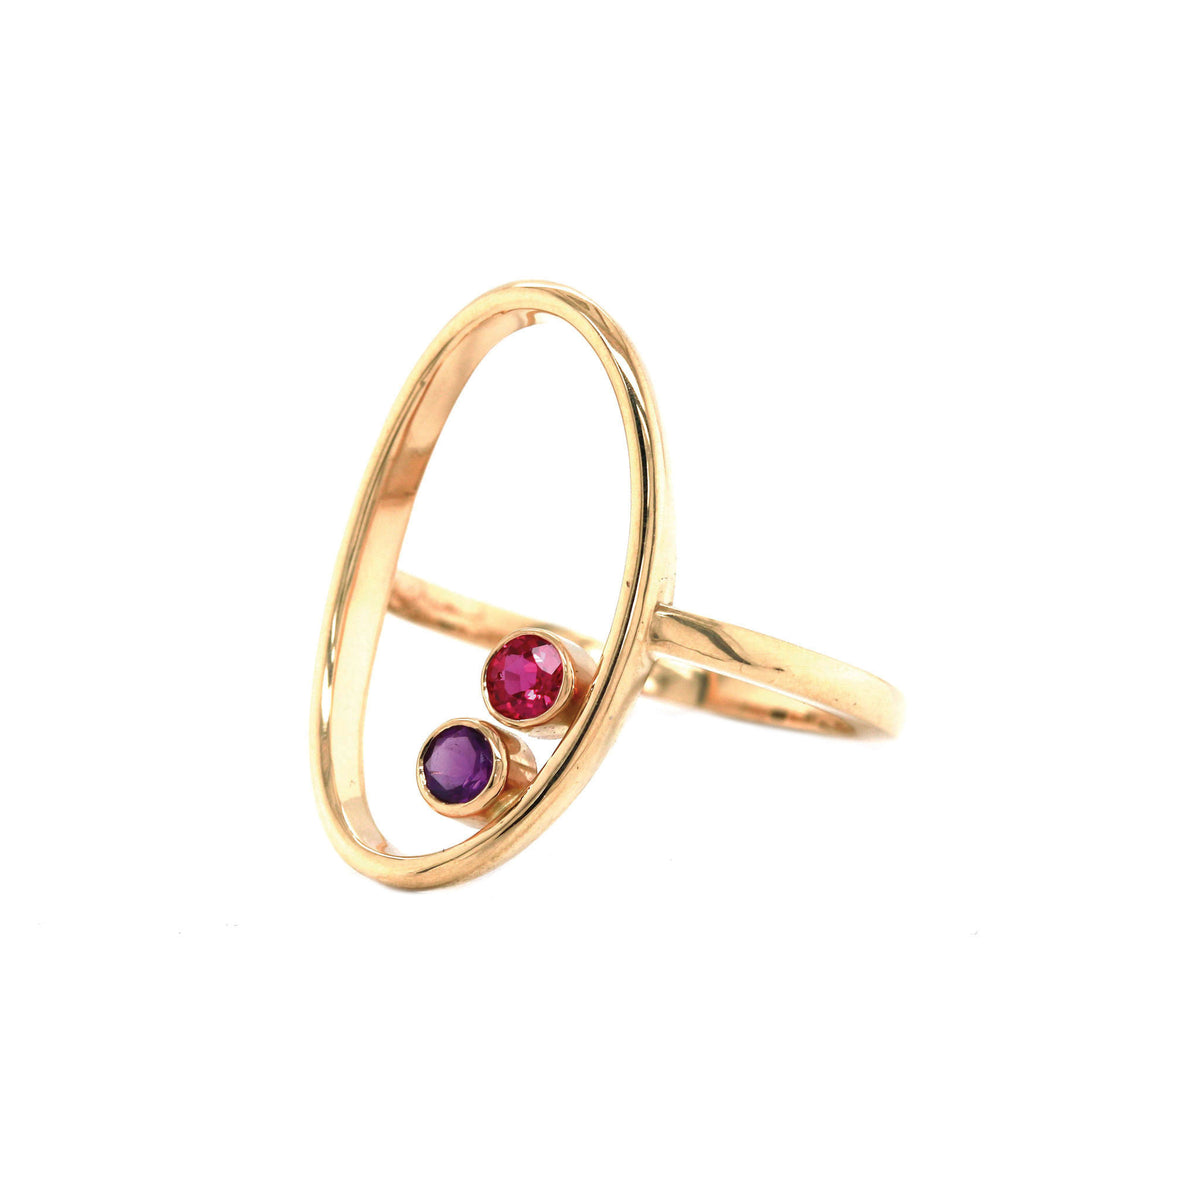 The Zuri Ring with Amethyst & Ruby